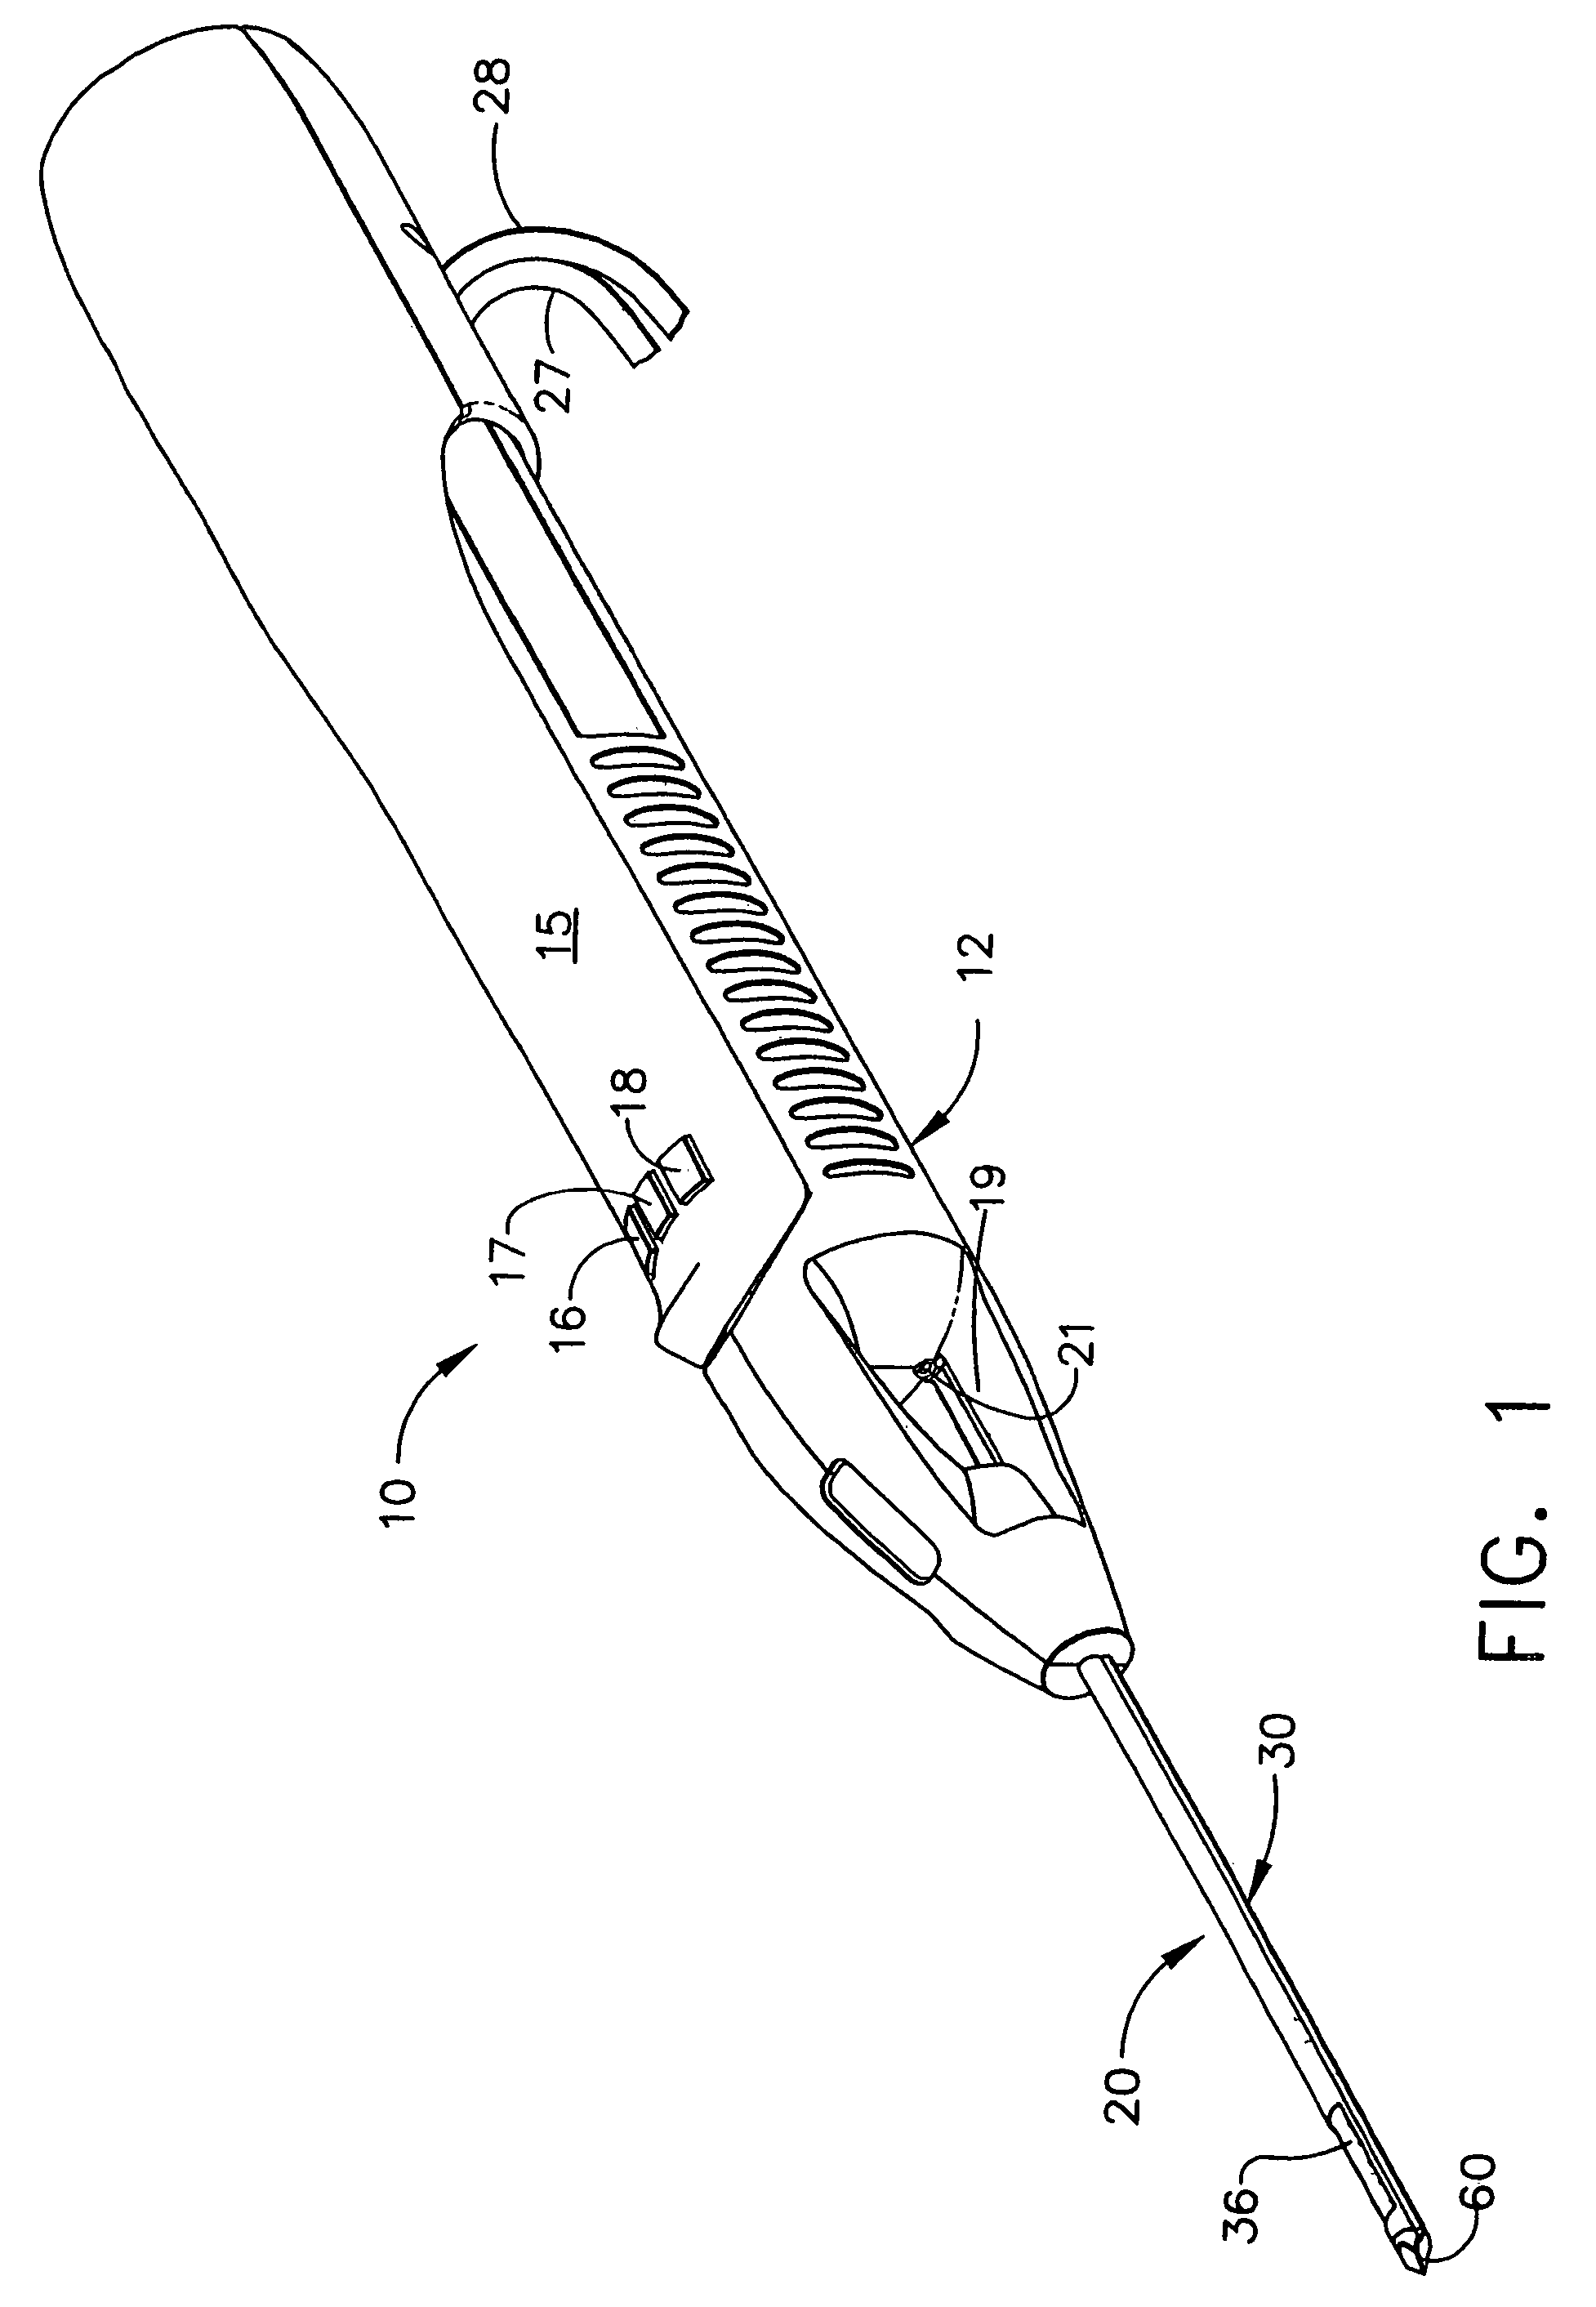 Method of forming a biopsy device